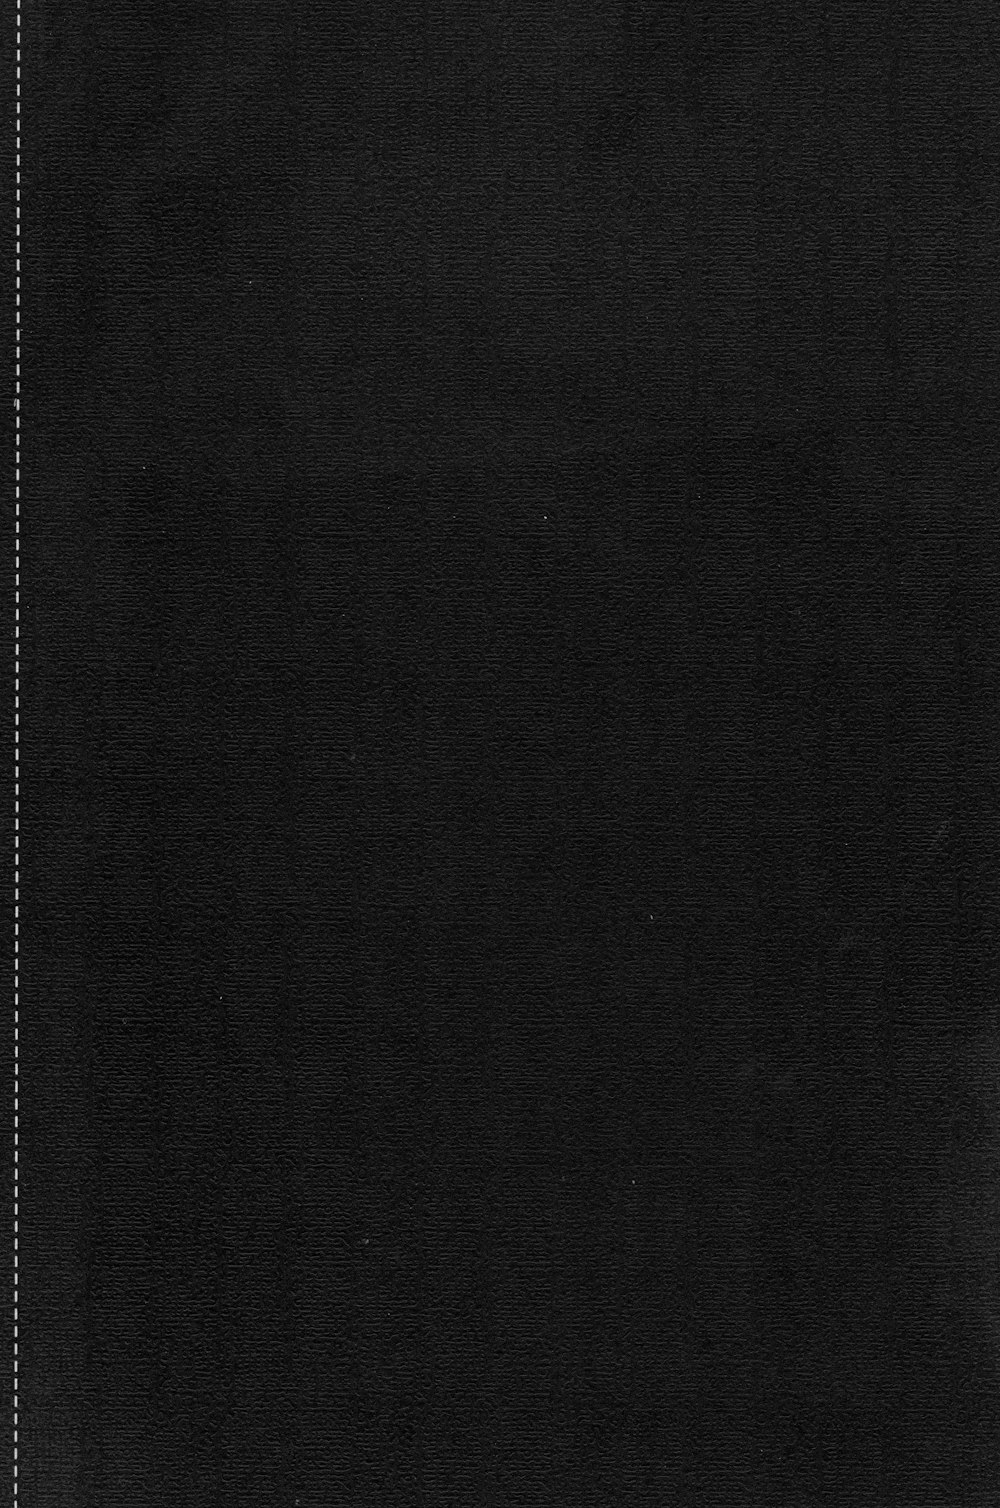 a black book with white stitching on the cover